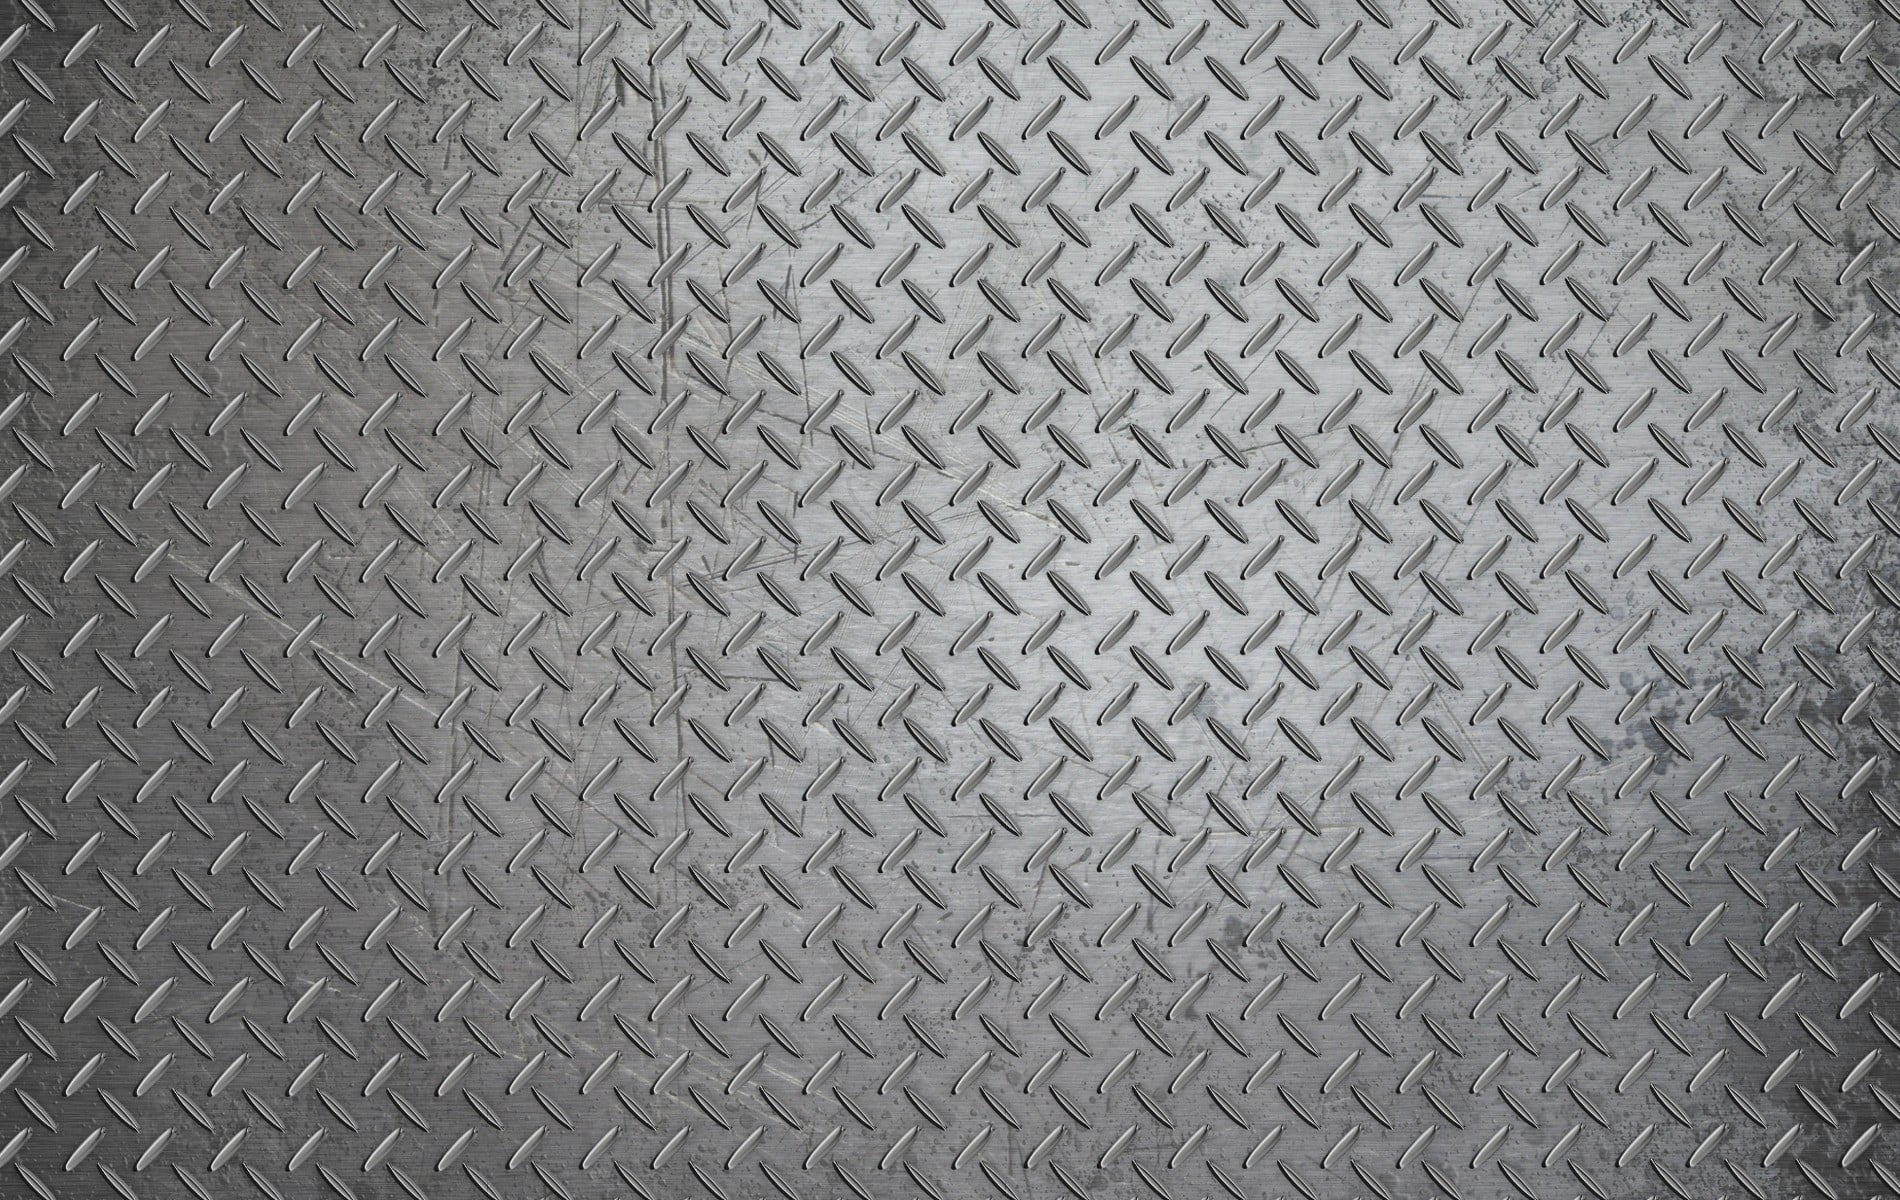 texture, metal, backgrounds, pattern, textured, abstract, full frame